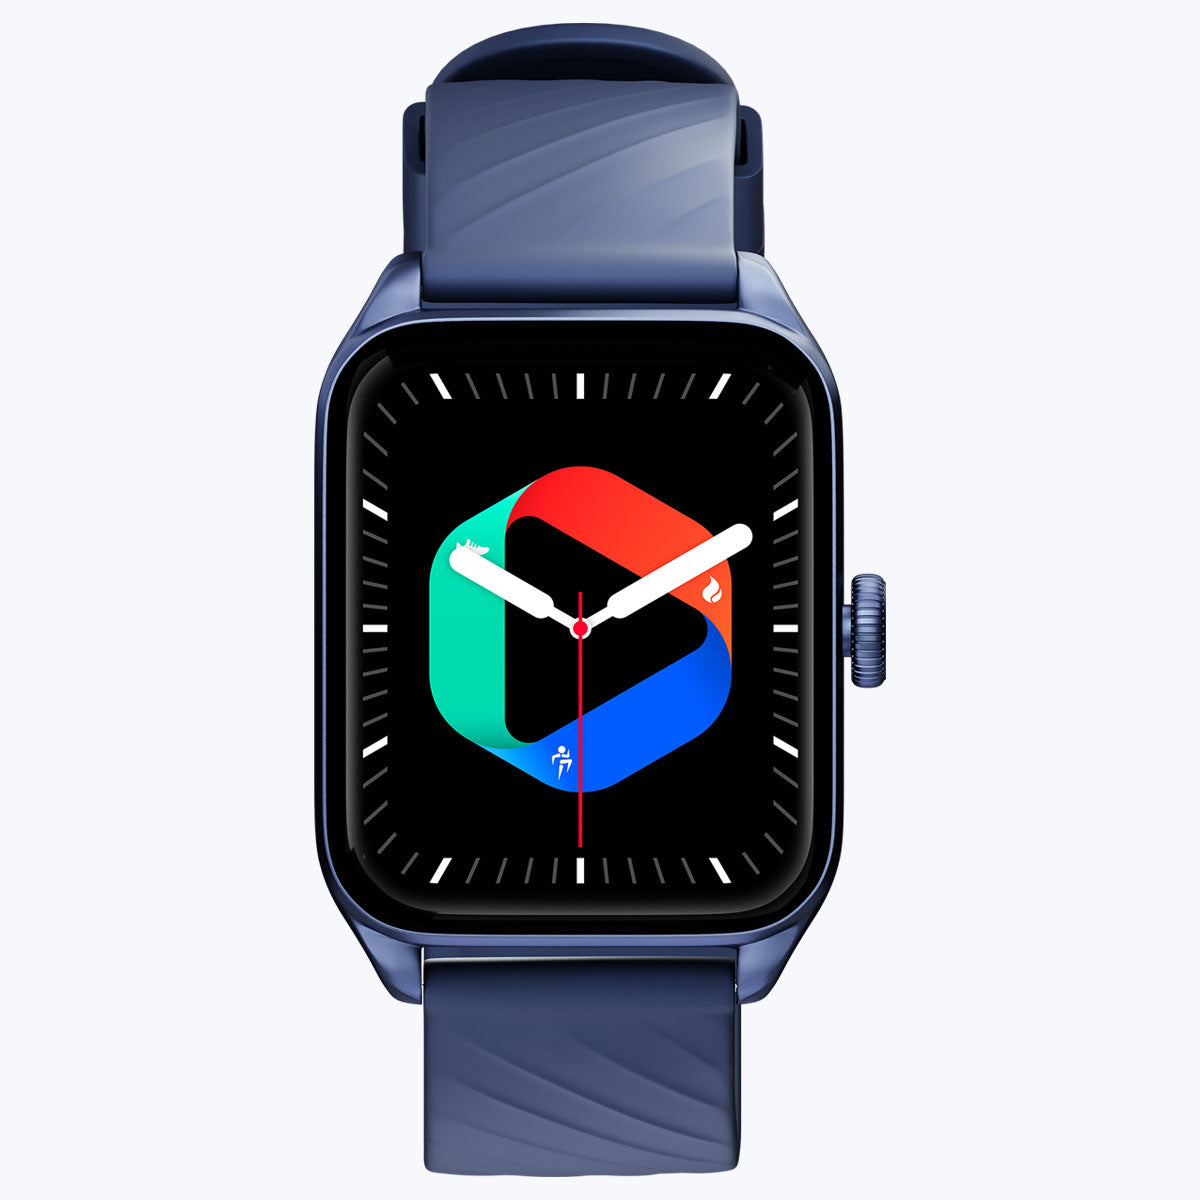 ZEBRONICS ZEB-FIT8220CH Smartwatch Price in India, Full Specifications &  Offers | DTashion.com